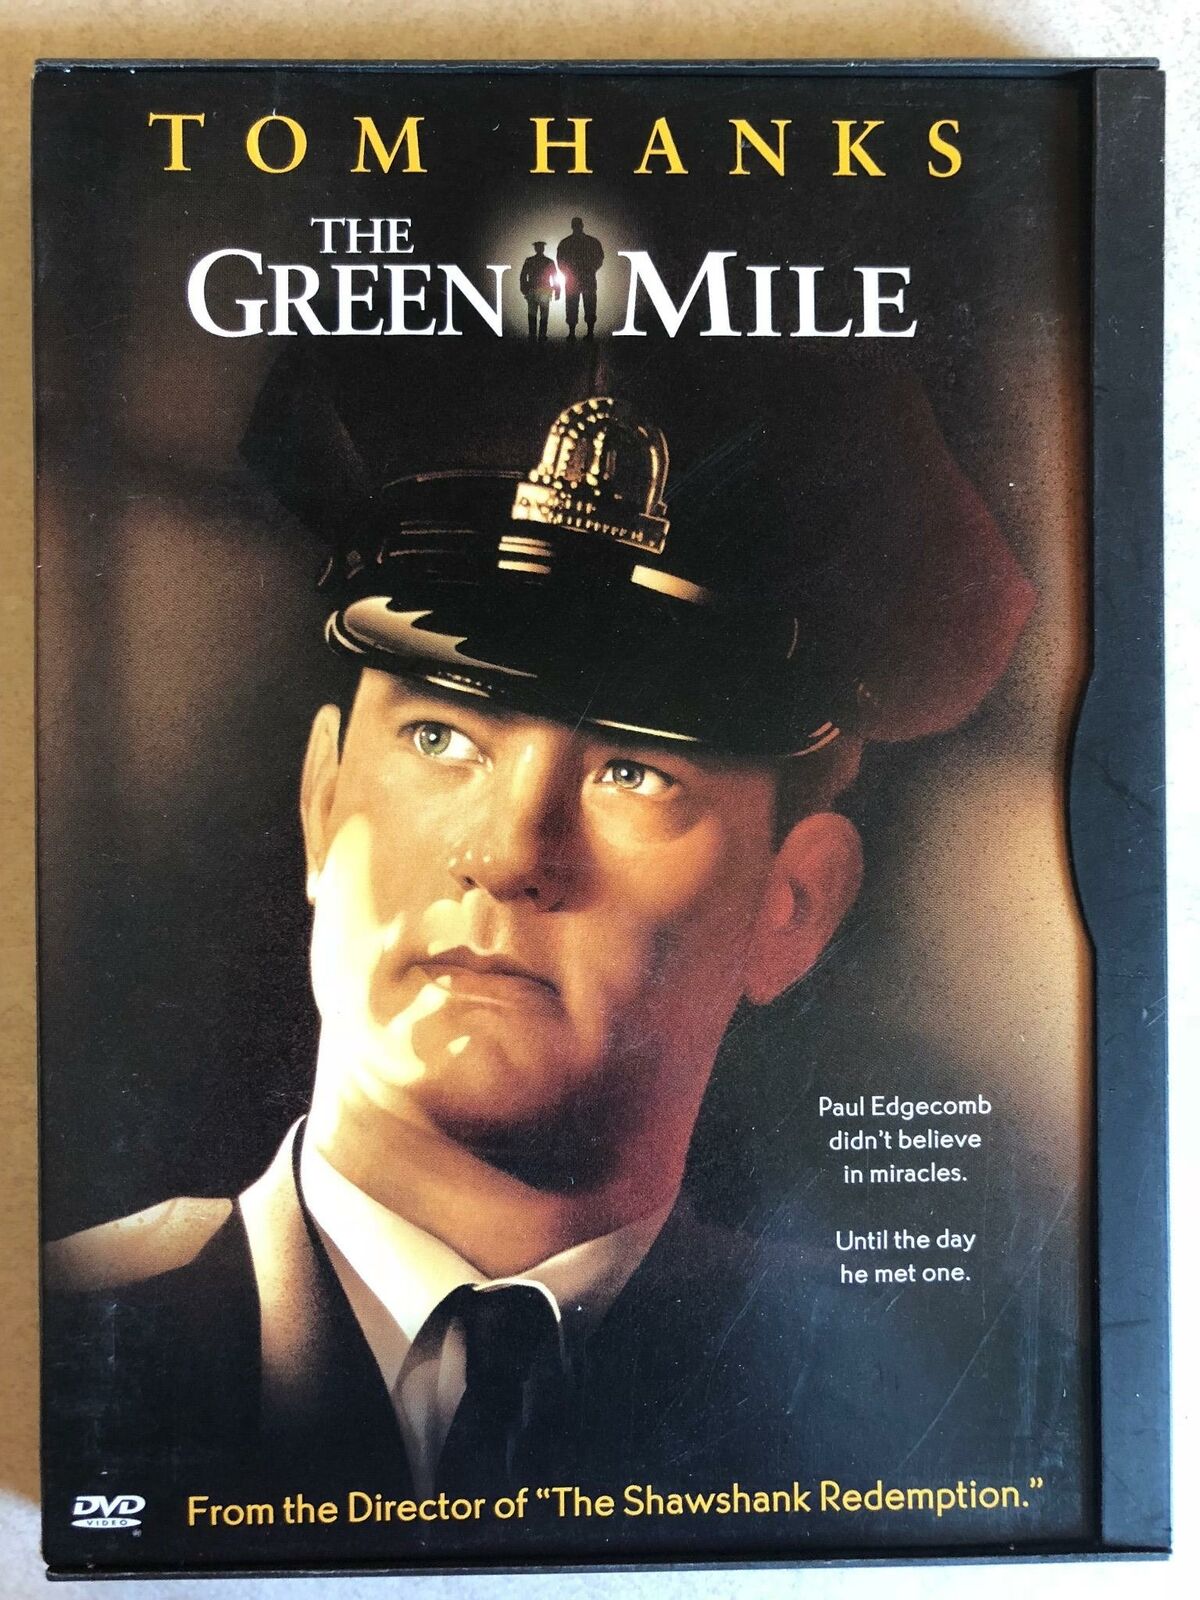 The Green Mile (DVD, 1999) - J1105